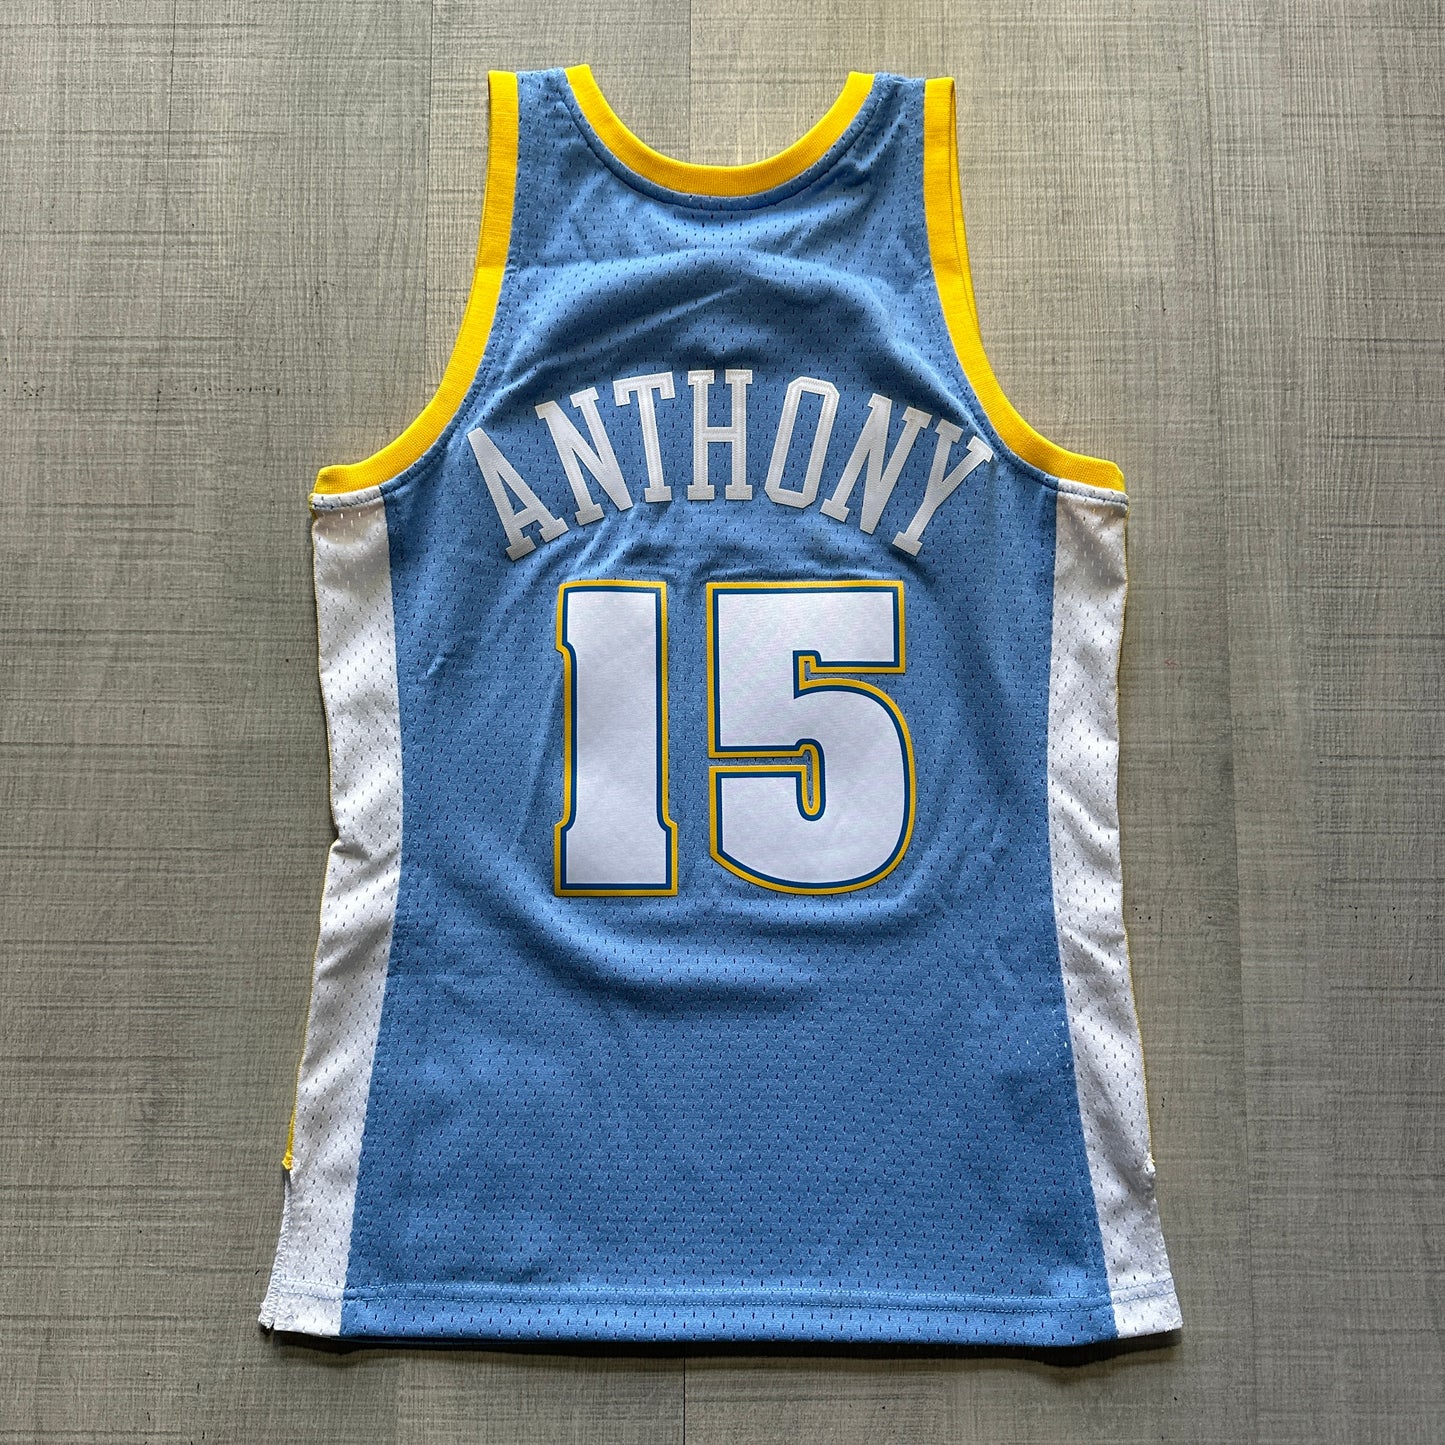 Carmelo Anthony Denver Nuggets 03-04 Mitchell & Ness Jersey